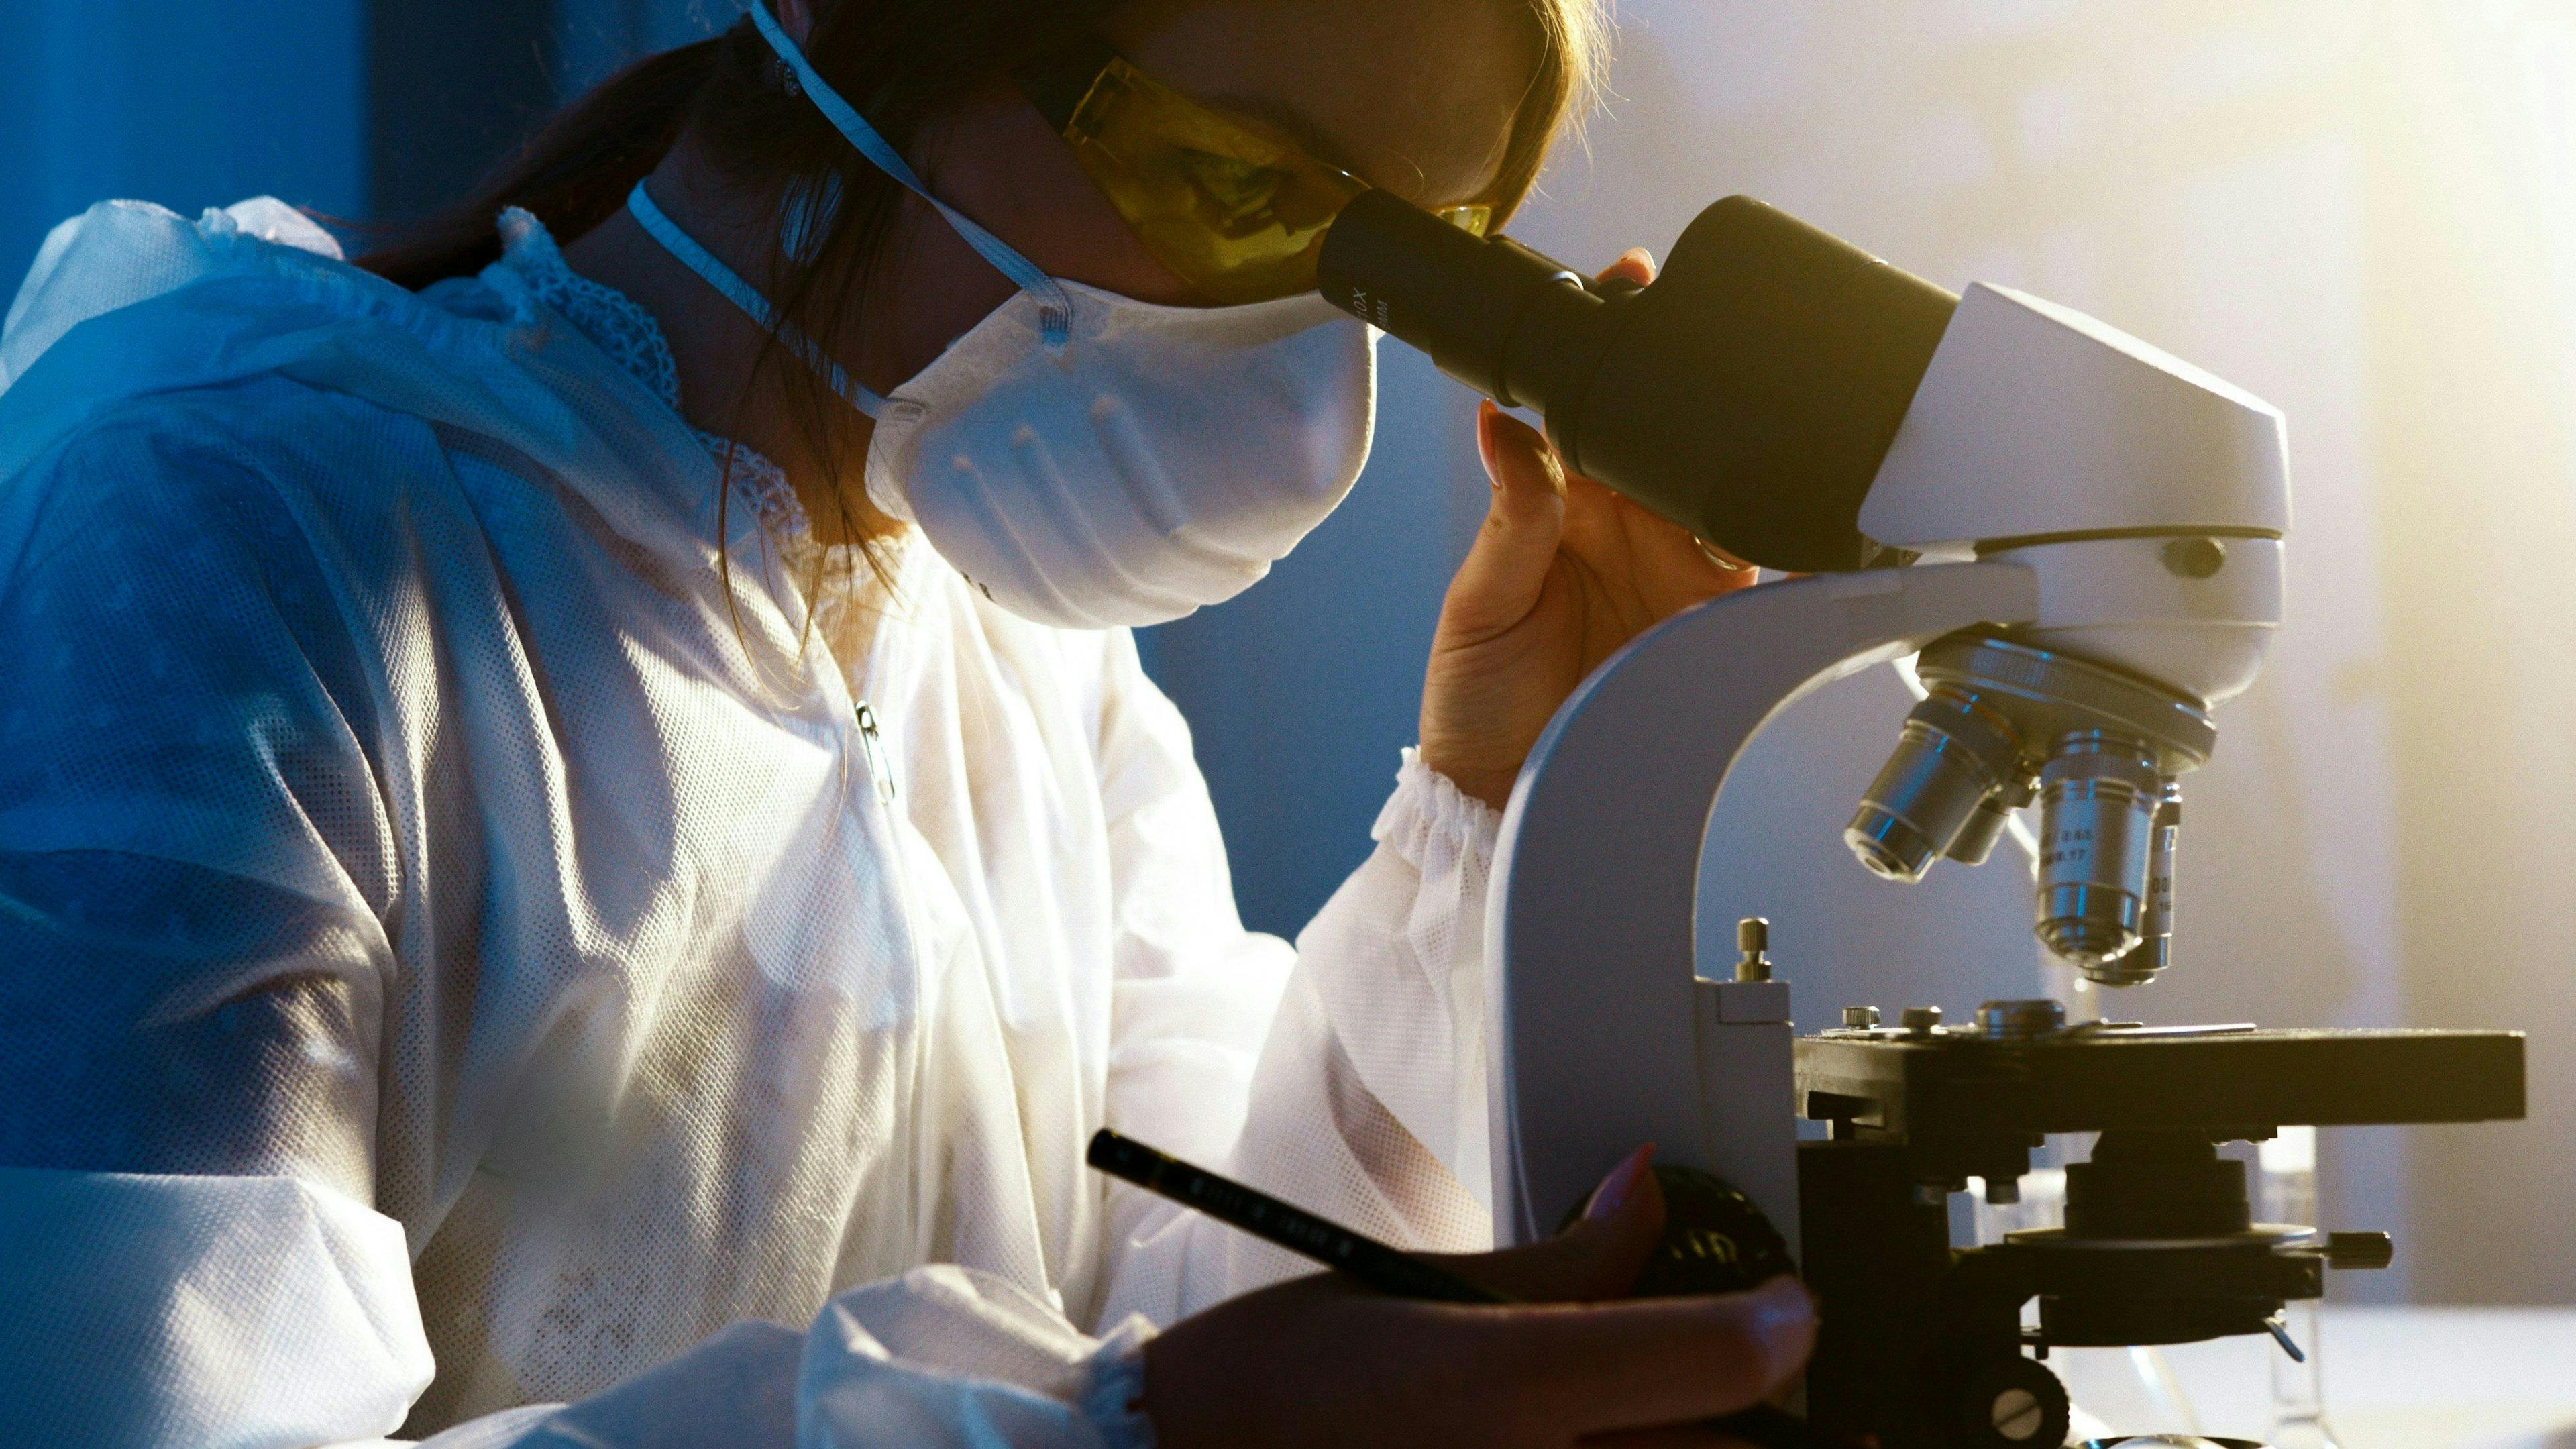 A scientist wearing protective gear and a mask examines a sample through a microscope in a brightly lit laboratory.